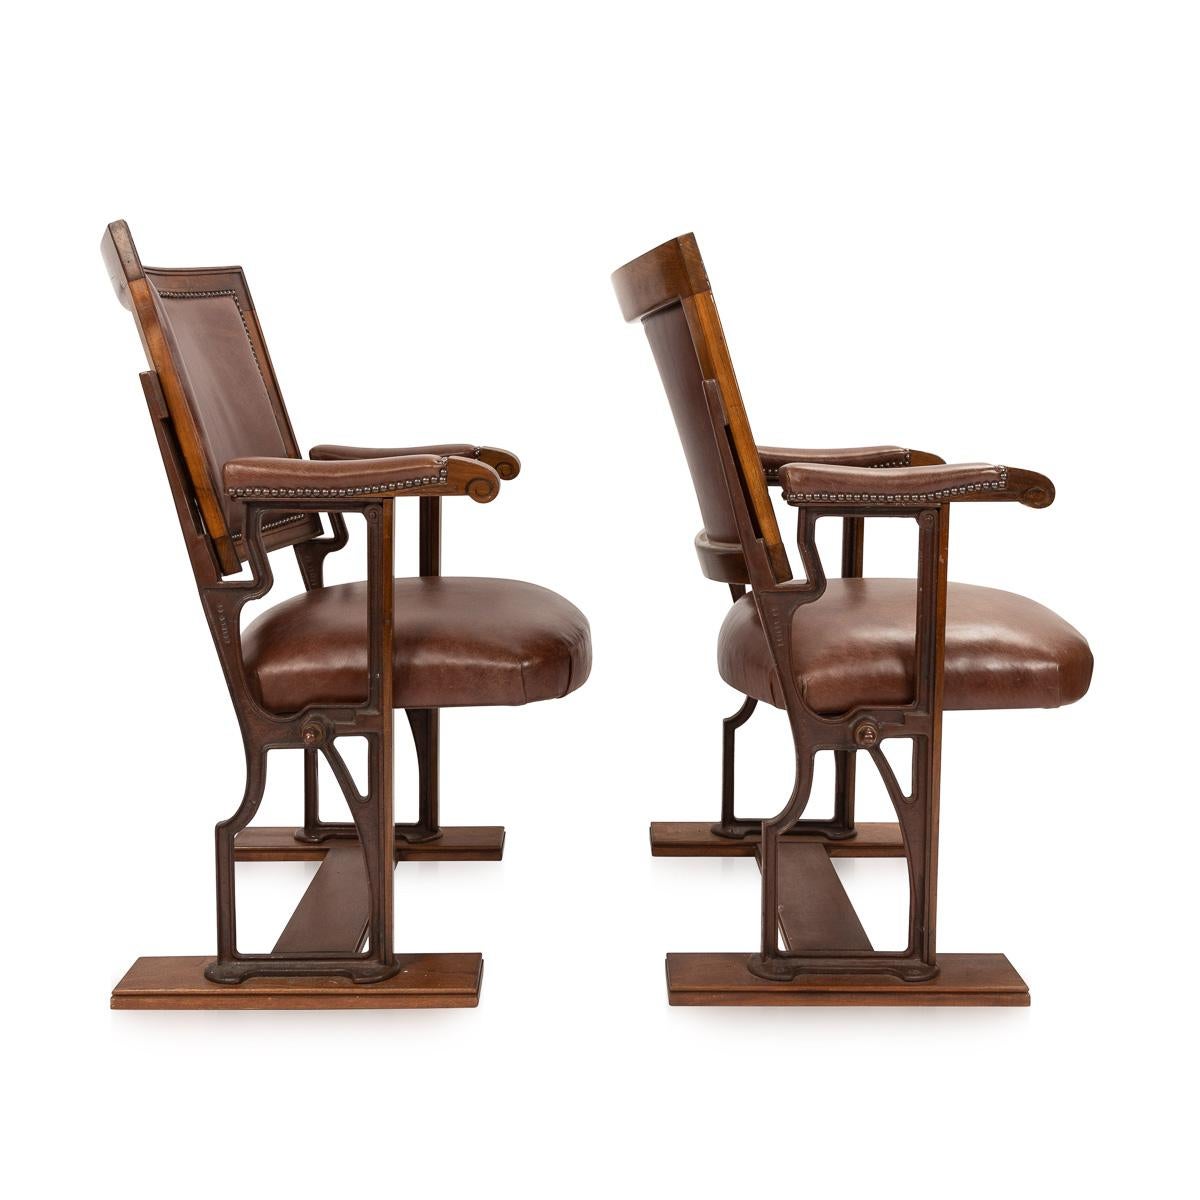 20th Century Edwardian Mahogany and Leather Cinema / Theatre Chairs, circa 1900 For Sale 1